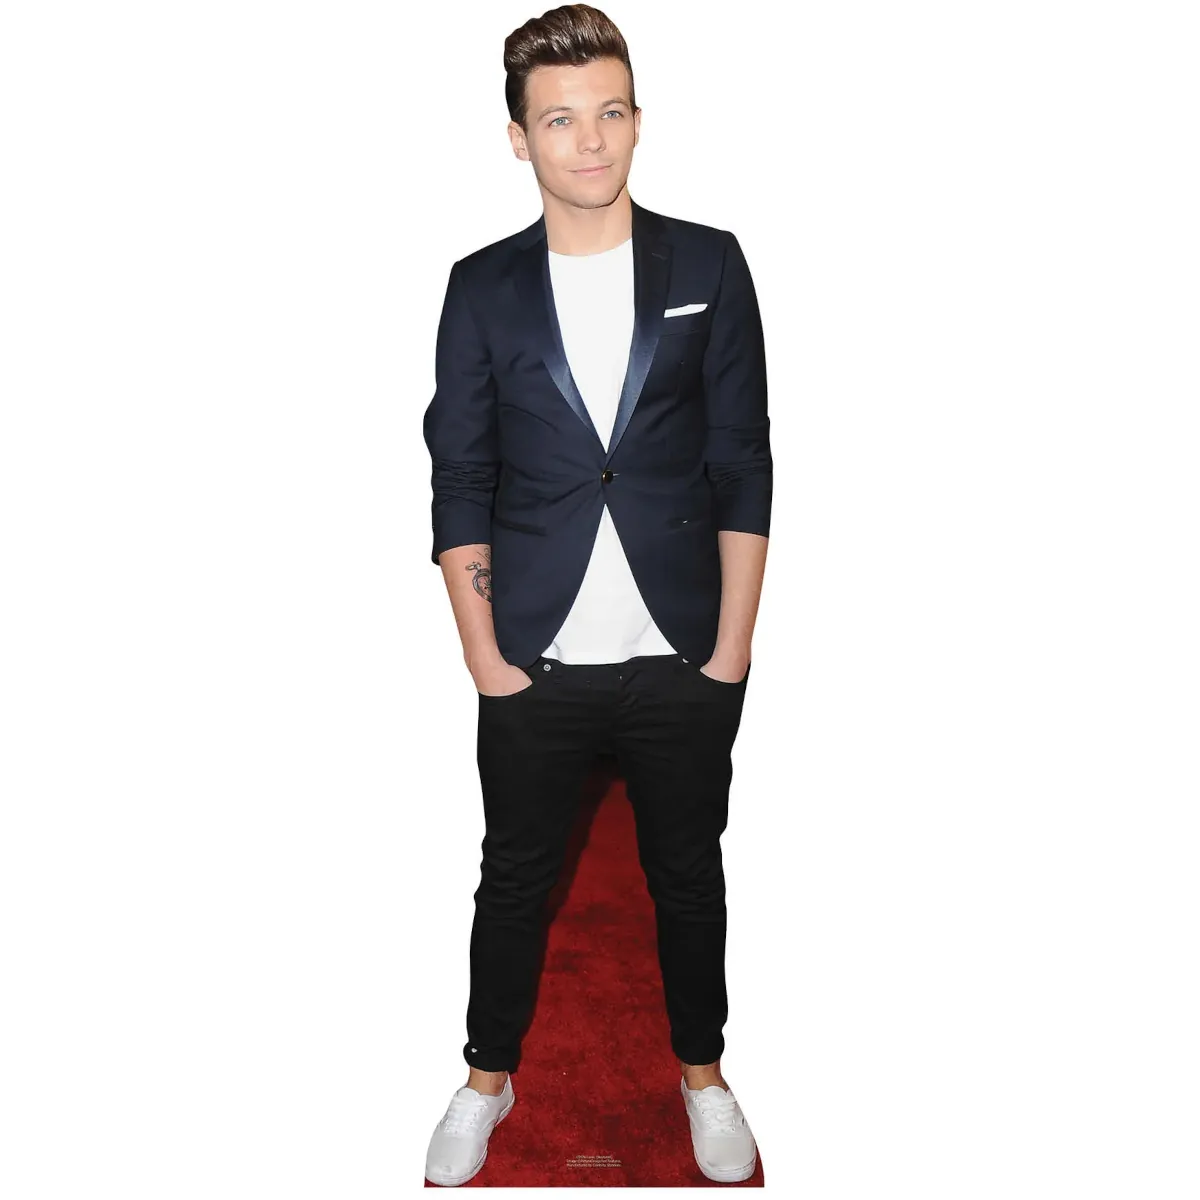 CS576 Louis Tomlinson 'One Direction' (English Singer Songwriter) Lifesize Cardboard Cutout Standee Front